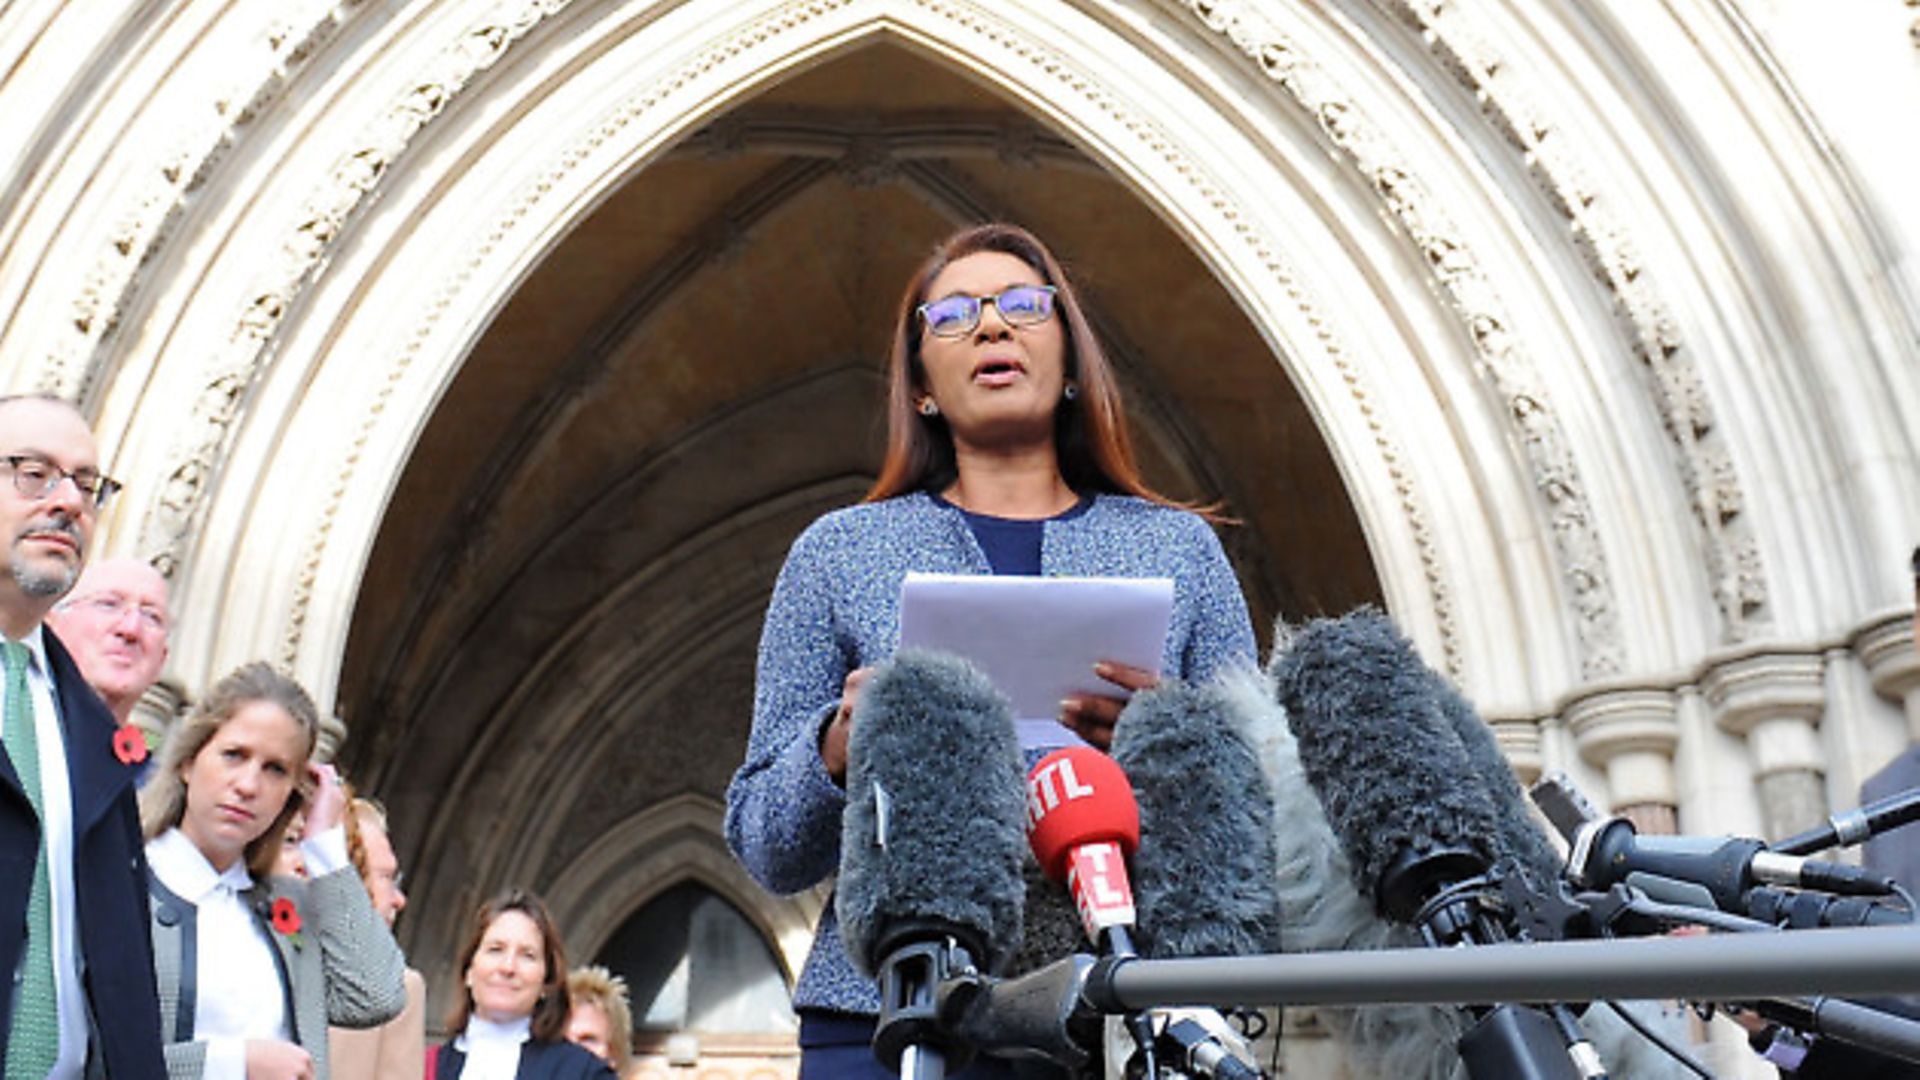 Gina Miller outside the High Court - Credit: PA Wire/PA Images